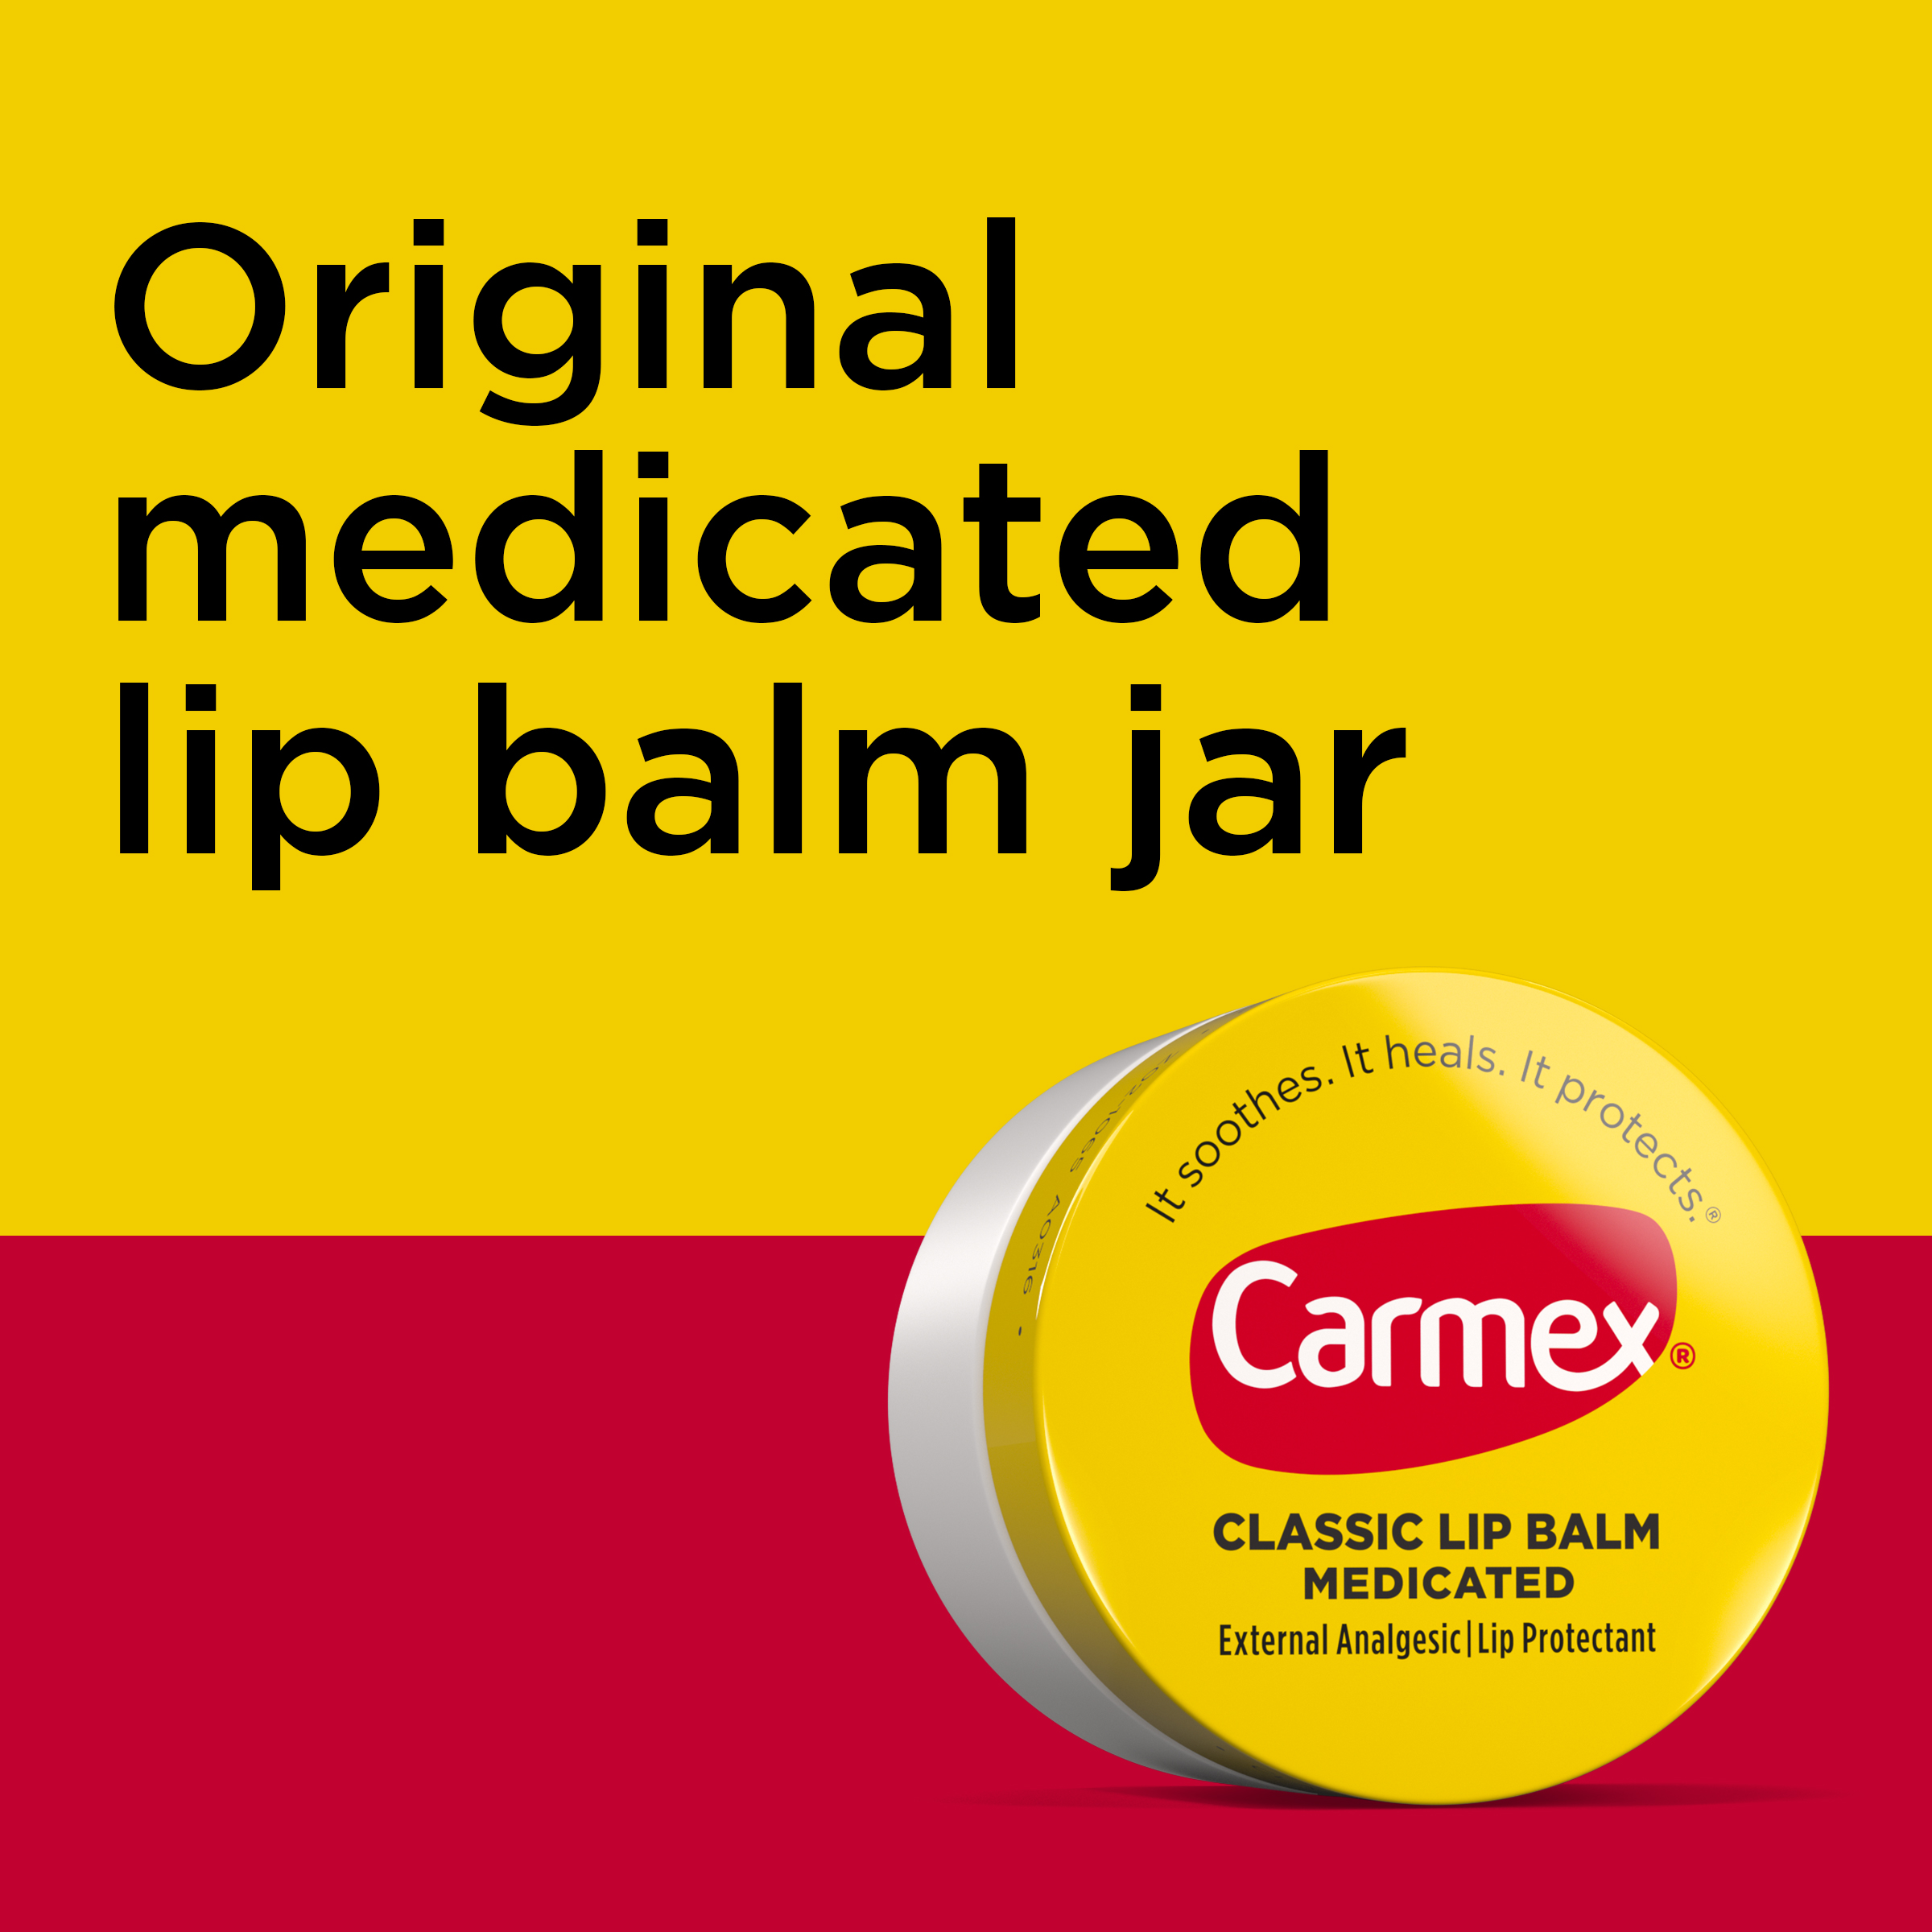 Carmex Medicated Lip Balm Limited Edition Holiday Jars, Lip Moisturizer for Dry, Chapped Lips, 0.25 OZ -3 Count - image 9 of 10